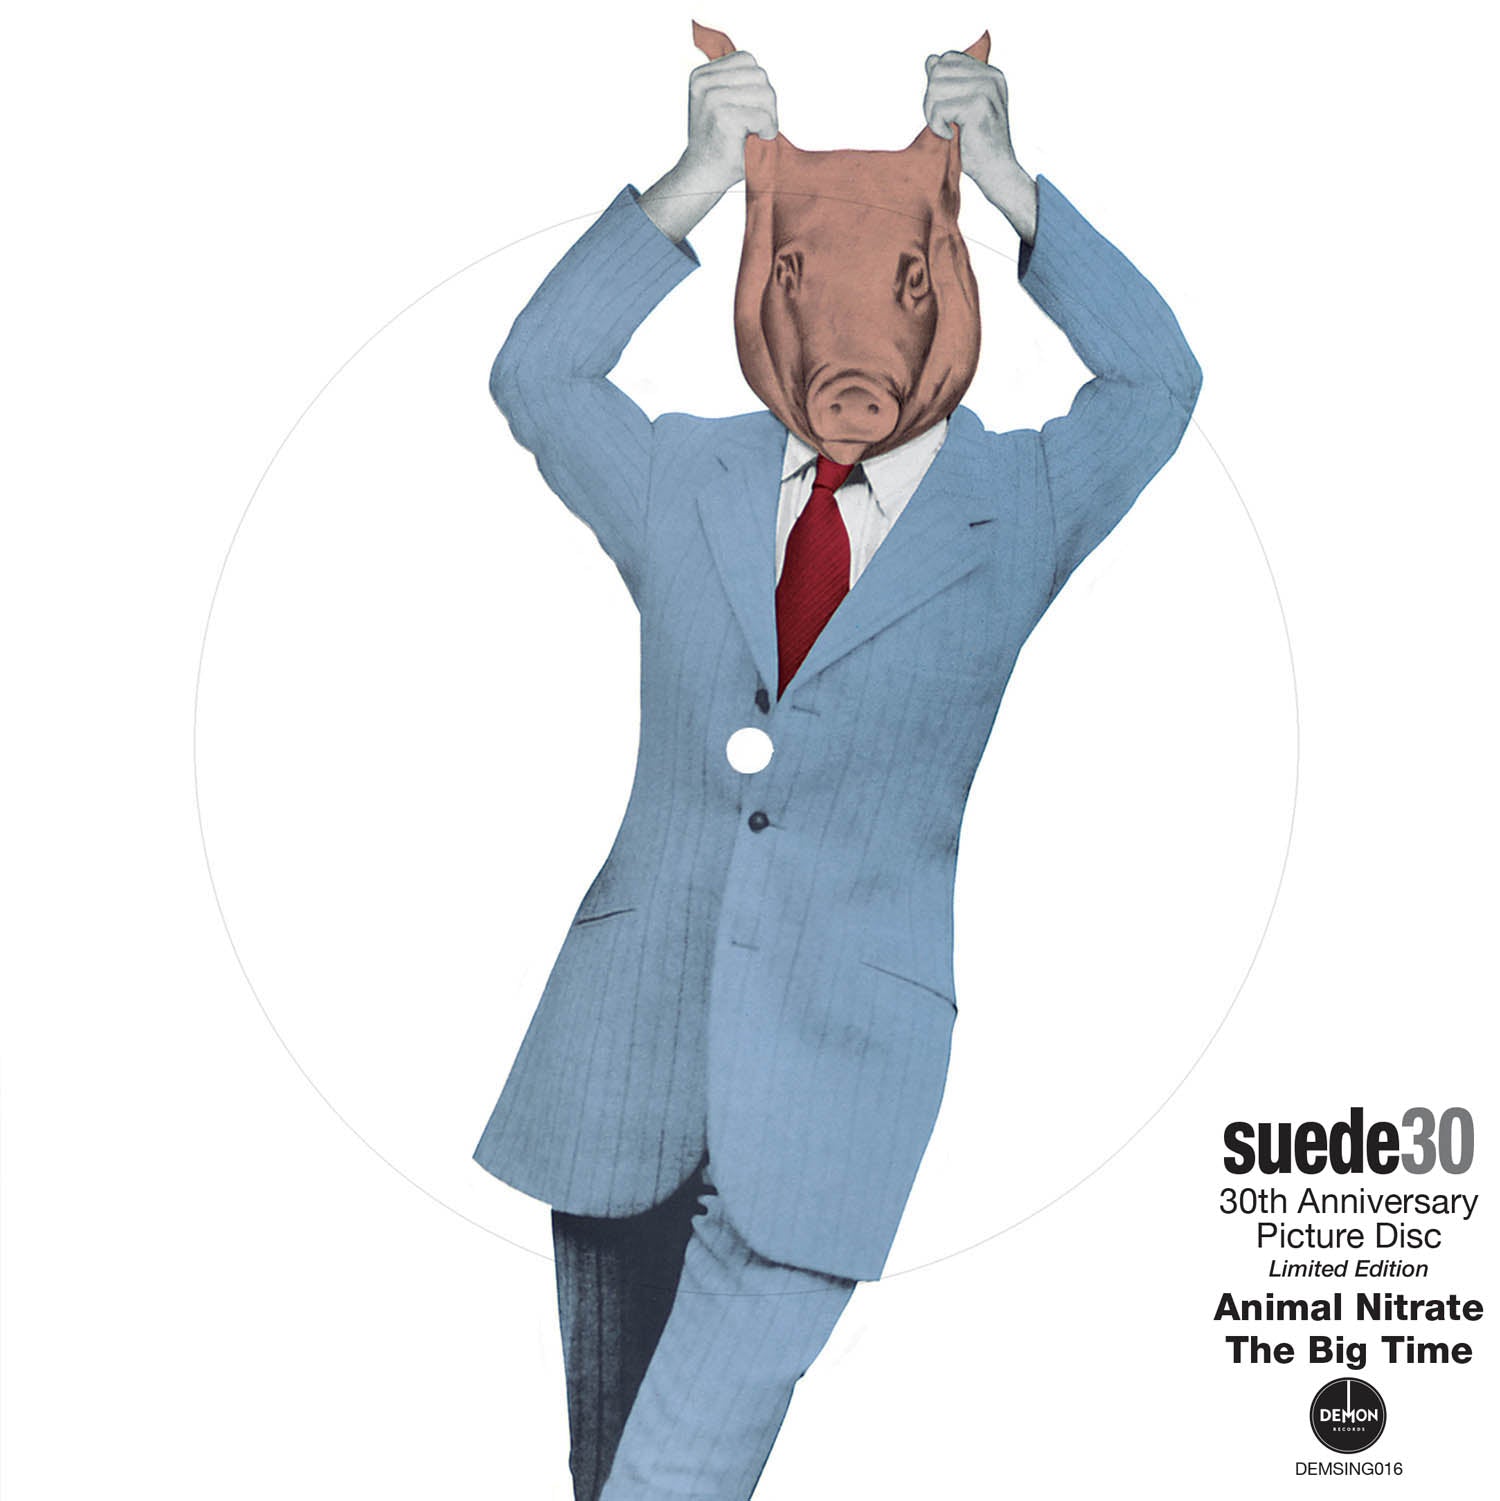 Suede - Animal Nitrate (30th Anniversary Edition): Limited Vinyl 7" Picture Disc.